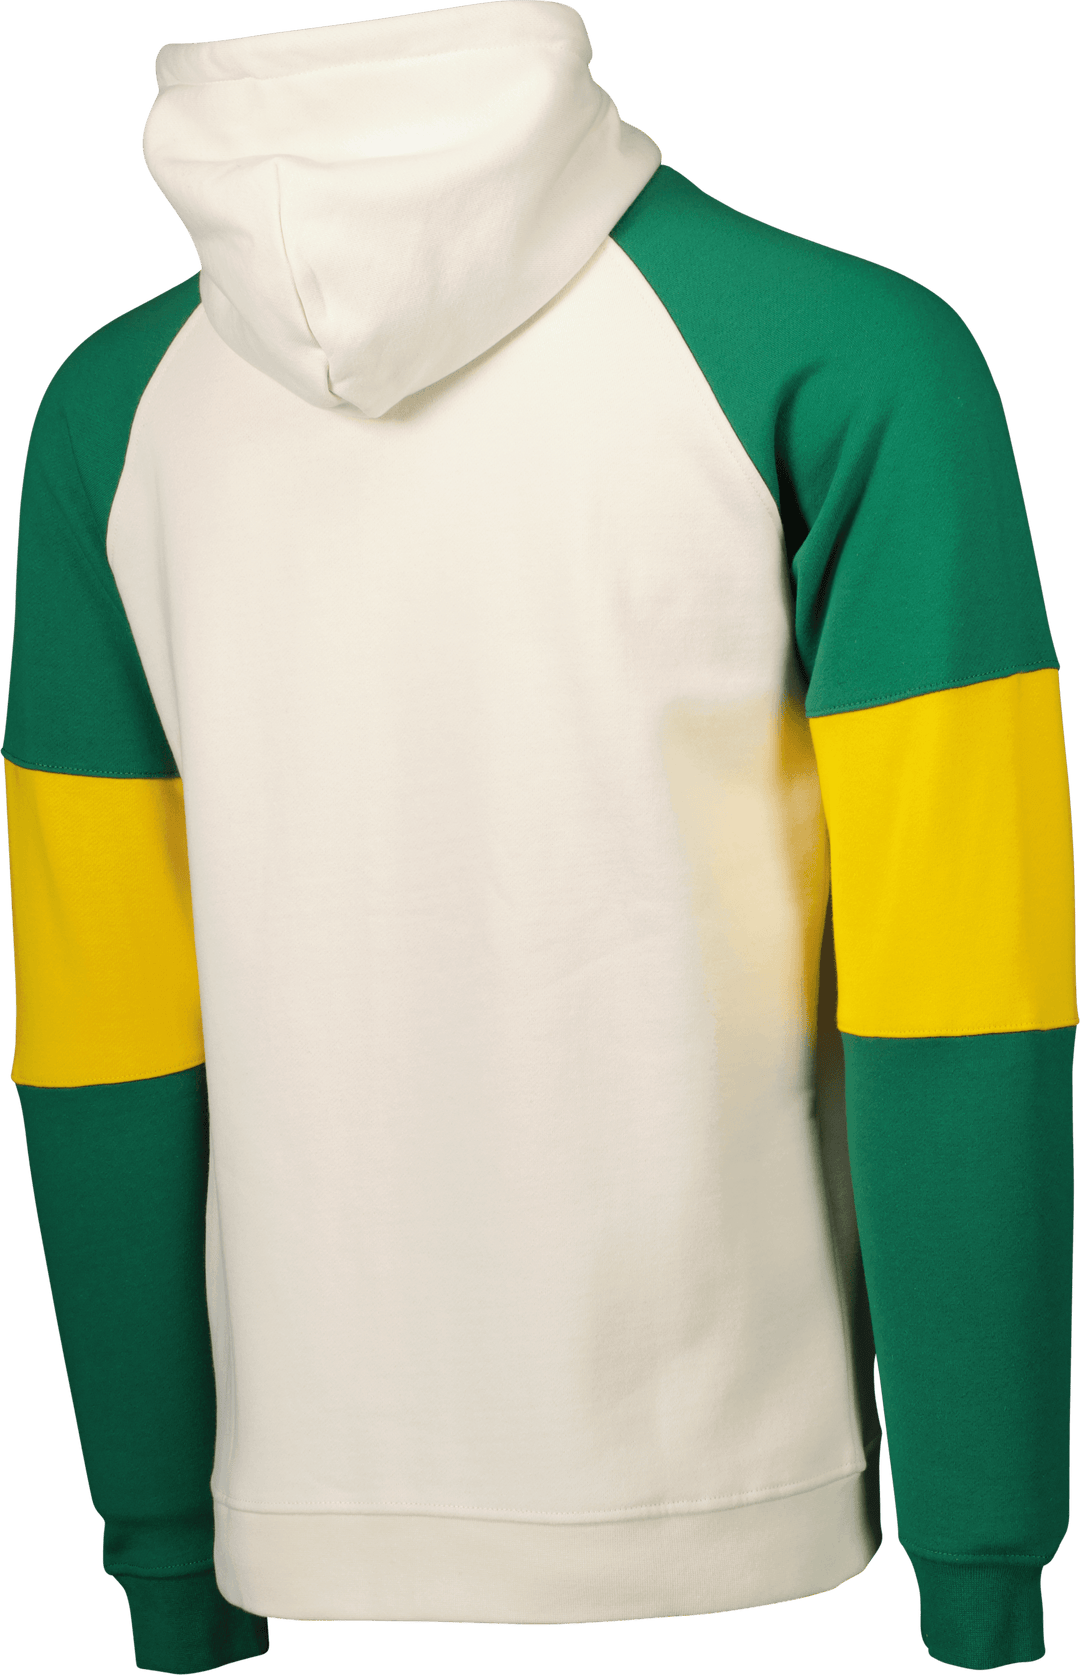 ROWDIES CREAM WITH GREEN AND YELLOW SLEEVES SPORT DESIGN SWEDEN FULL ZIP HOODIE - The Bay Republic | Team Store of the Tampa Bay Rays & Rowdies